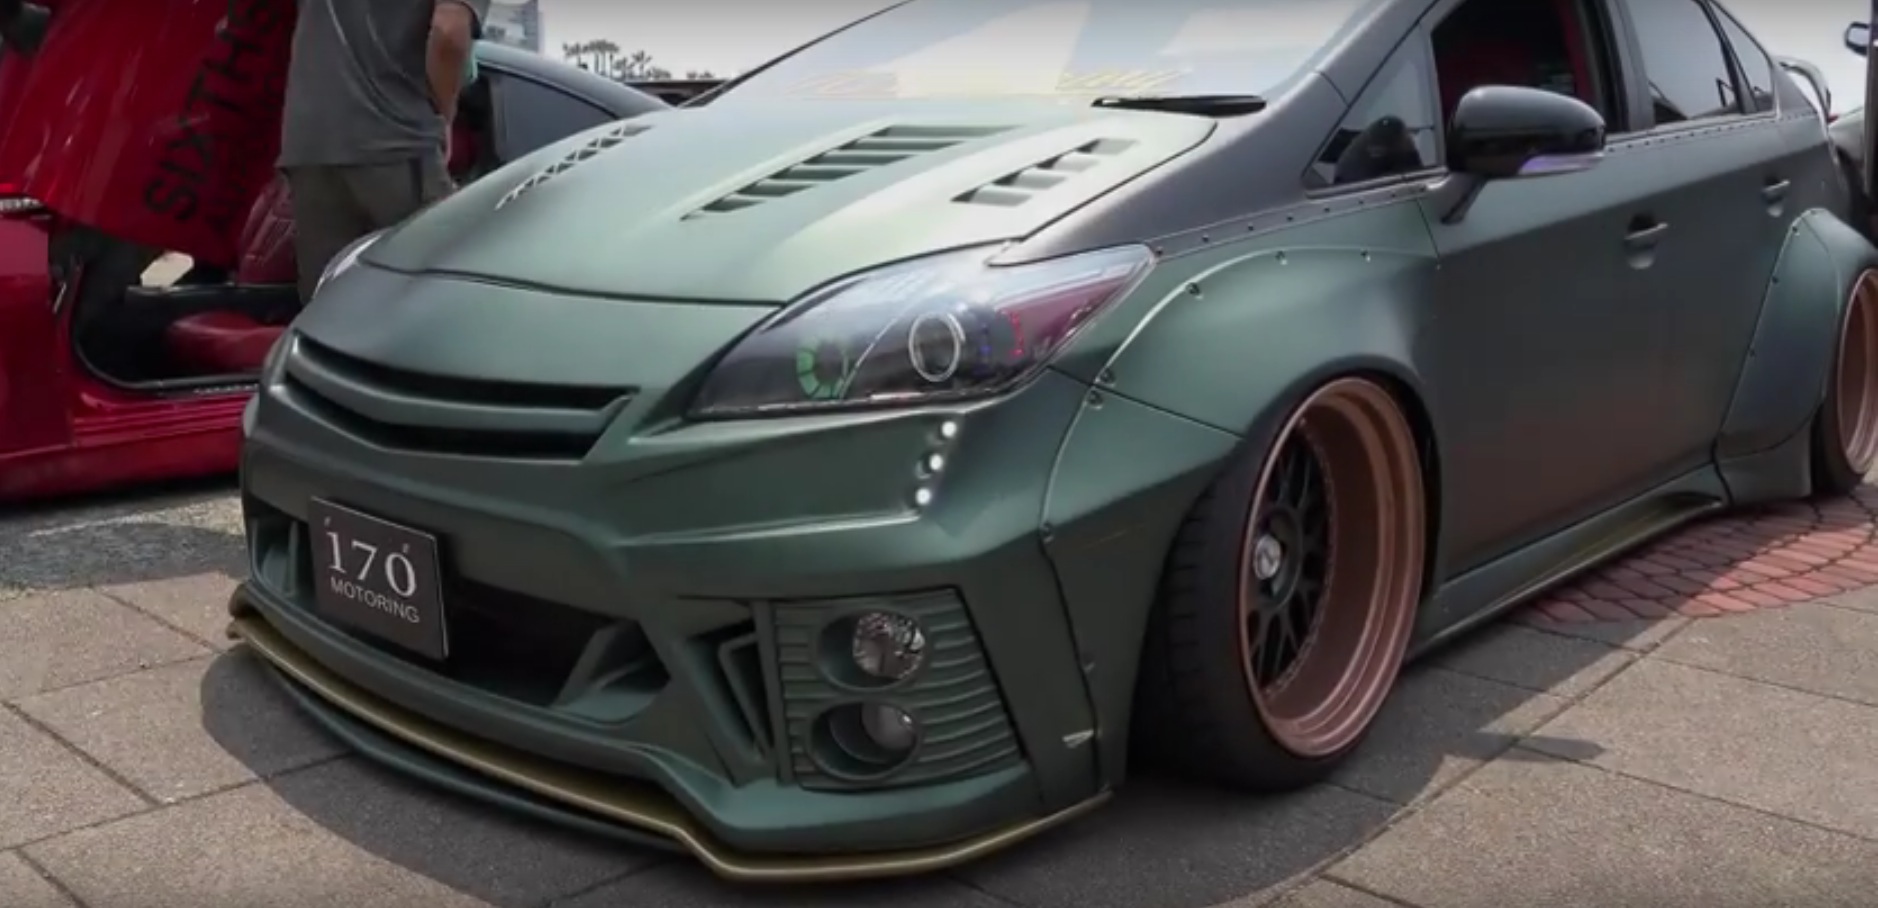 Toyota Prius with Rocket Bunny Kit from 170 Motoring Is an Insane JDM